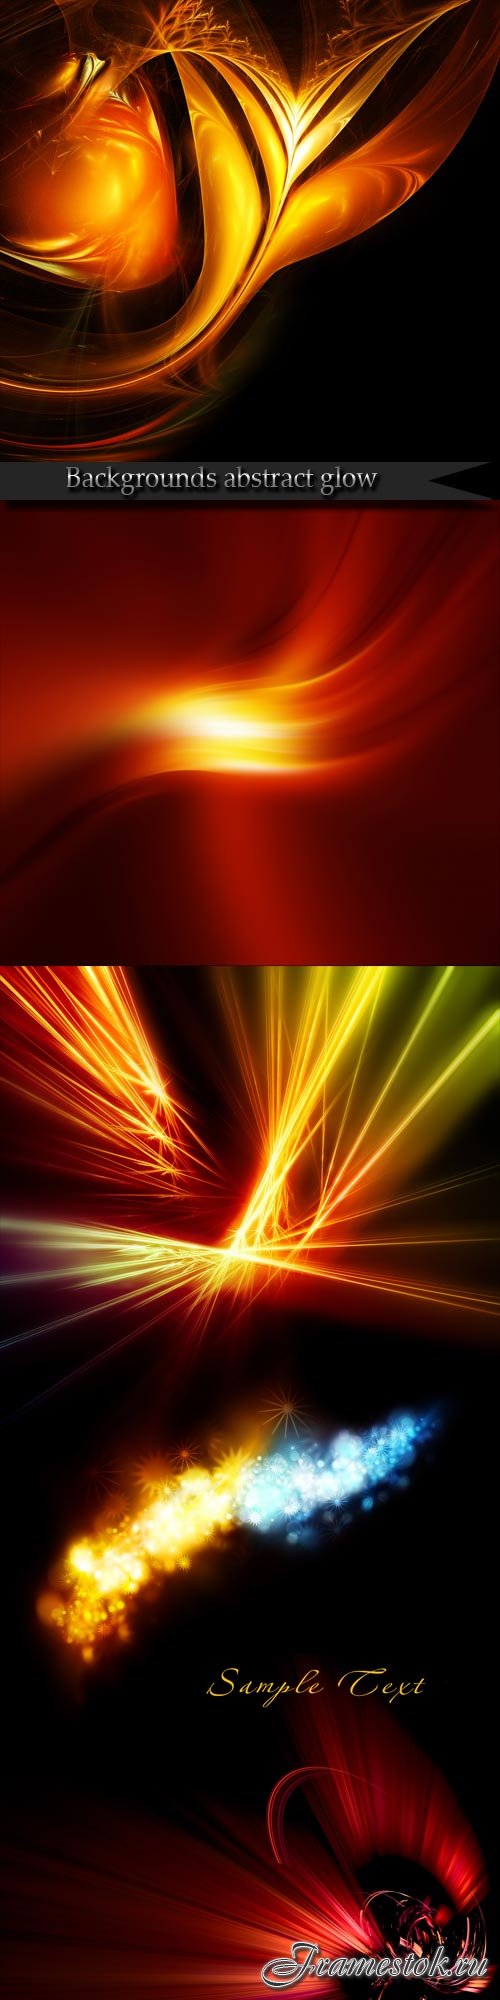 Backgrounds abstract glow